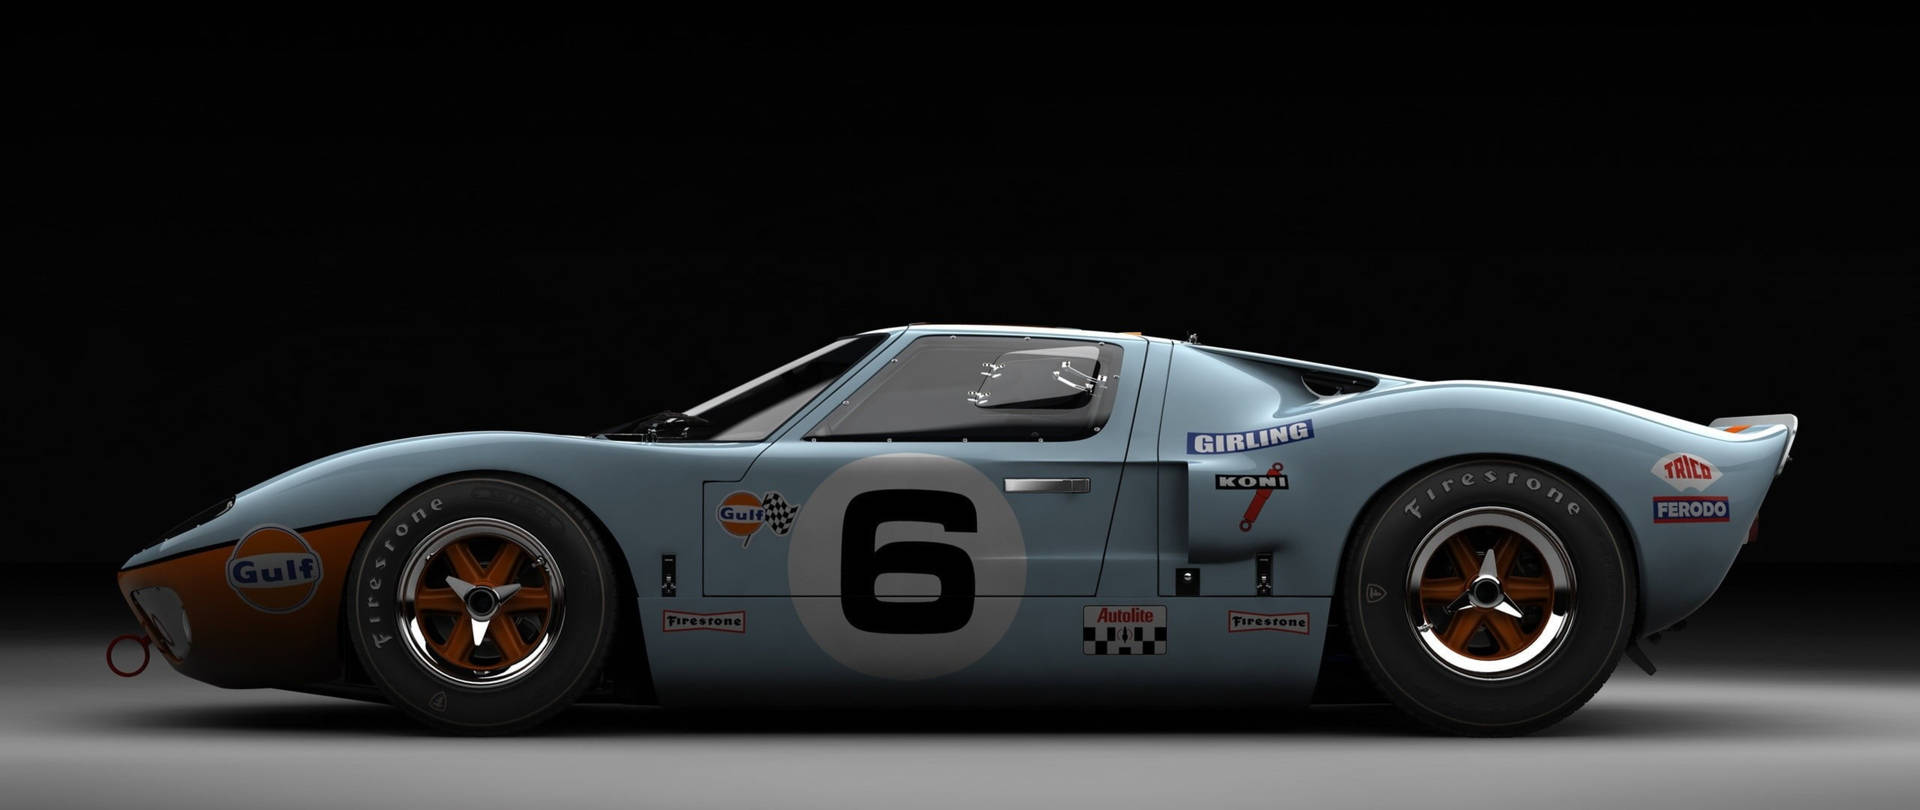 Sports Car Ford Gt40 Side View Background